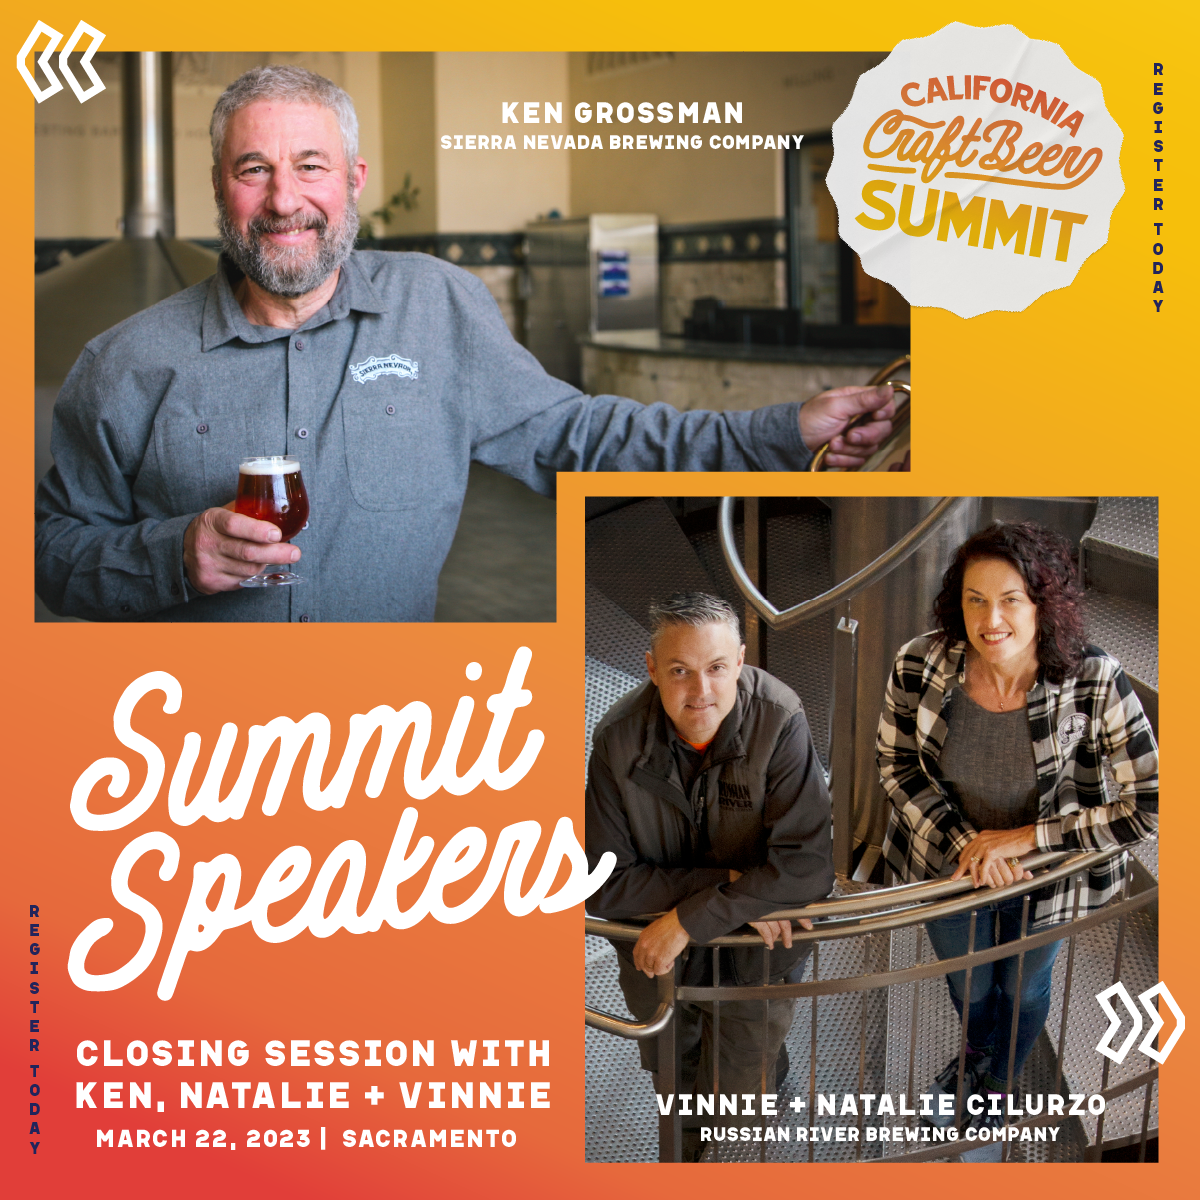 Summit Closing Session with Ken, Natalie and Vinnie!